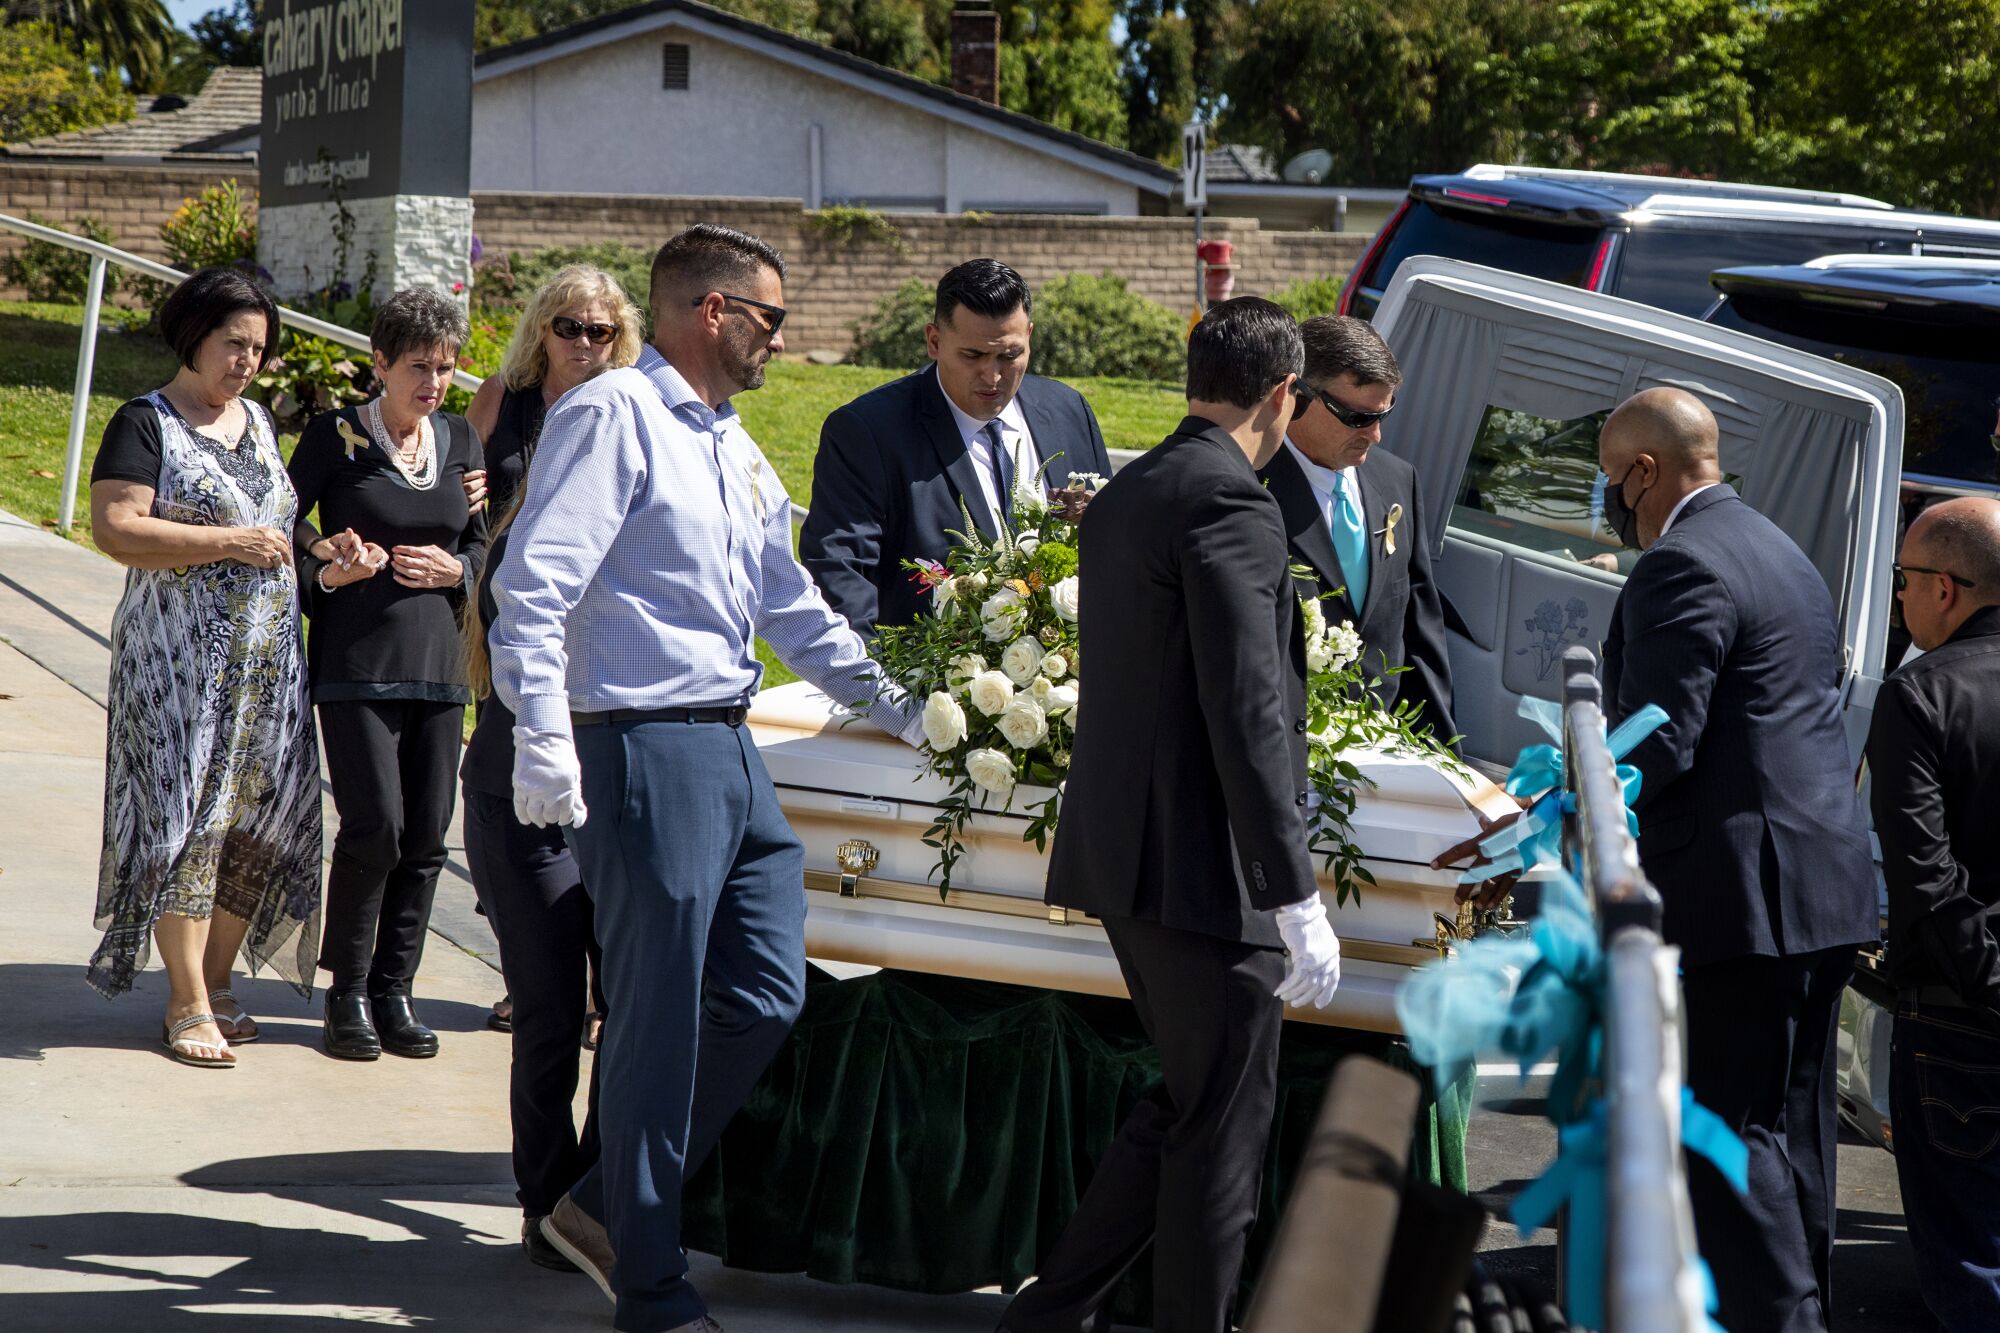 Family members walk behind the casket of 6-year-old Aiden Leos.